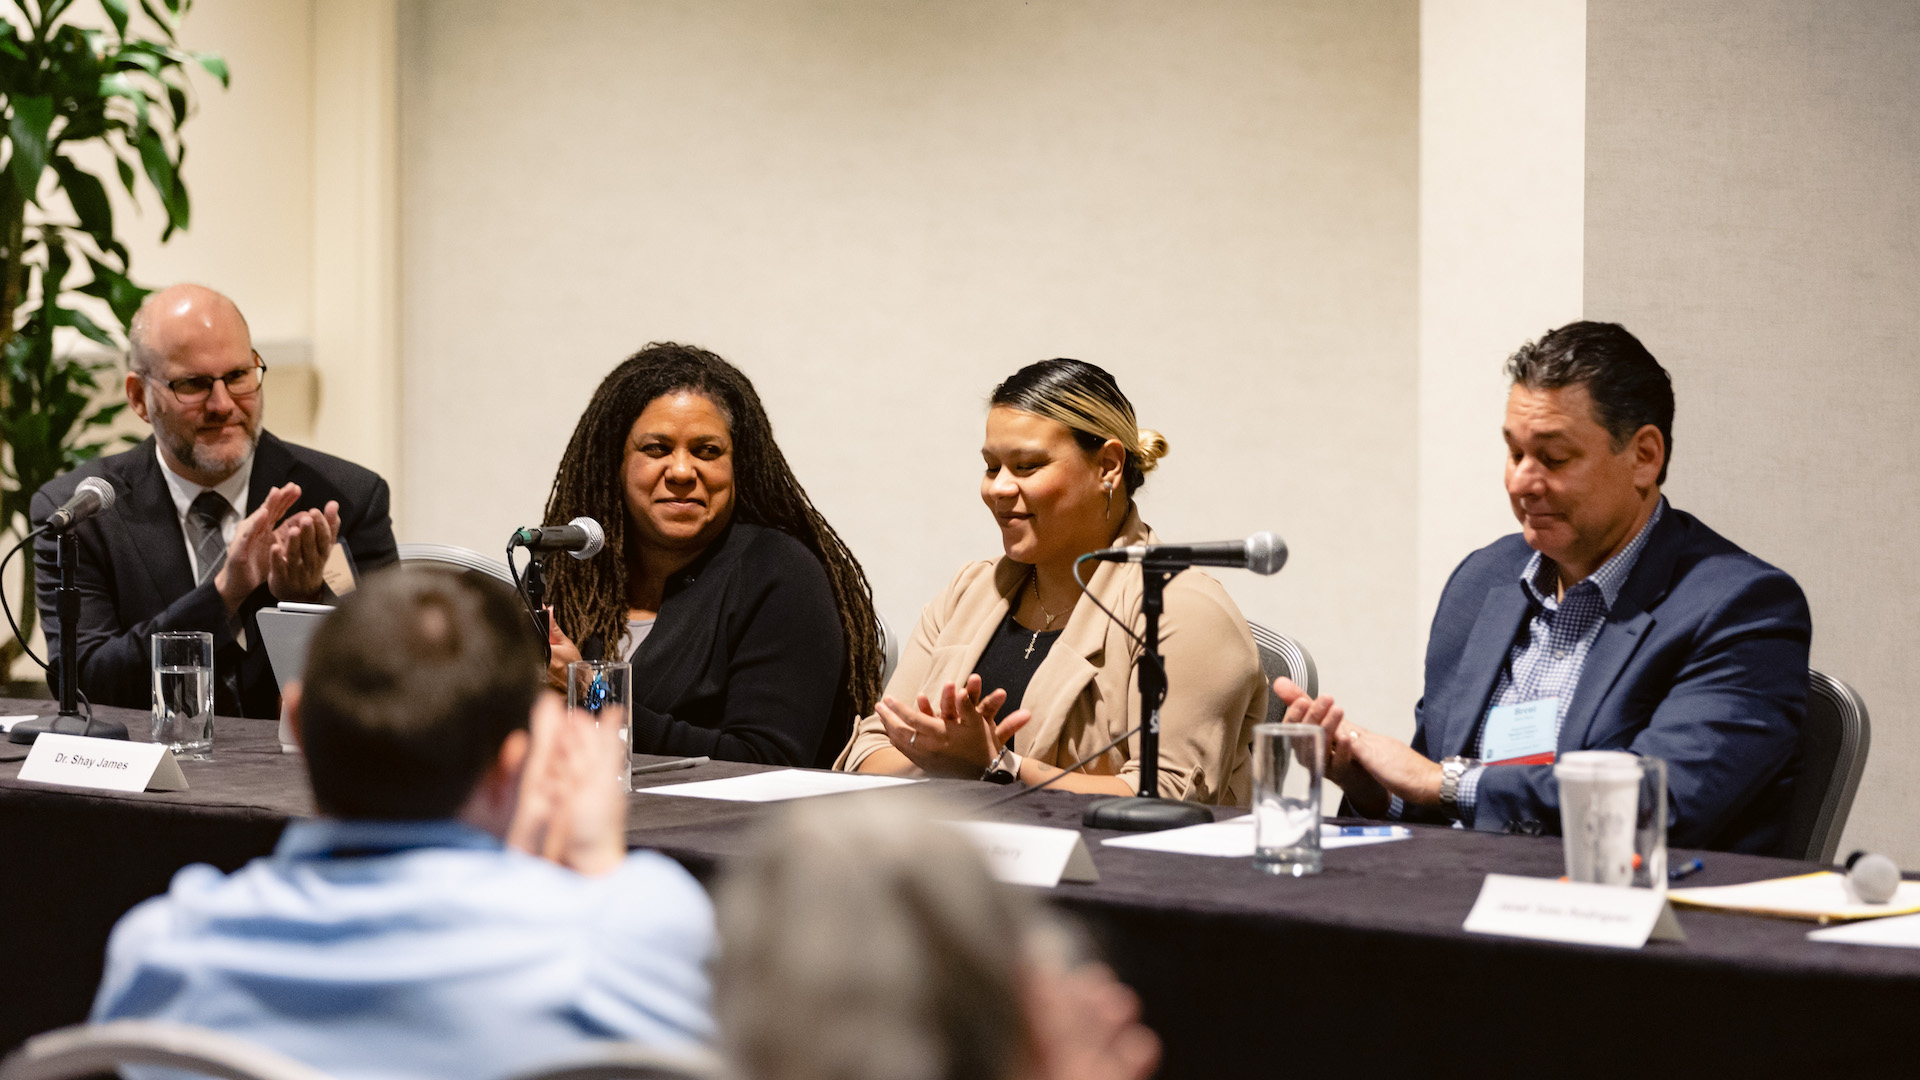 Scott Nine, Dr. Shay James, Evelin Gonzalez, and Brent Barry speak at the 2022 Oregon School Boards Association annual convention.